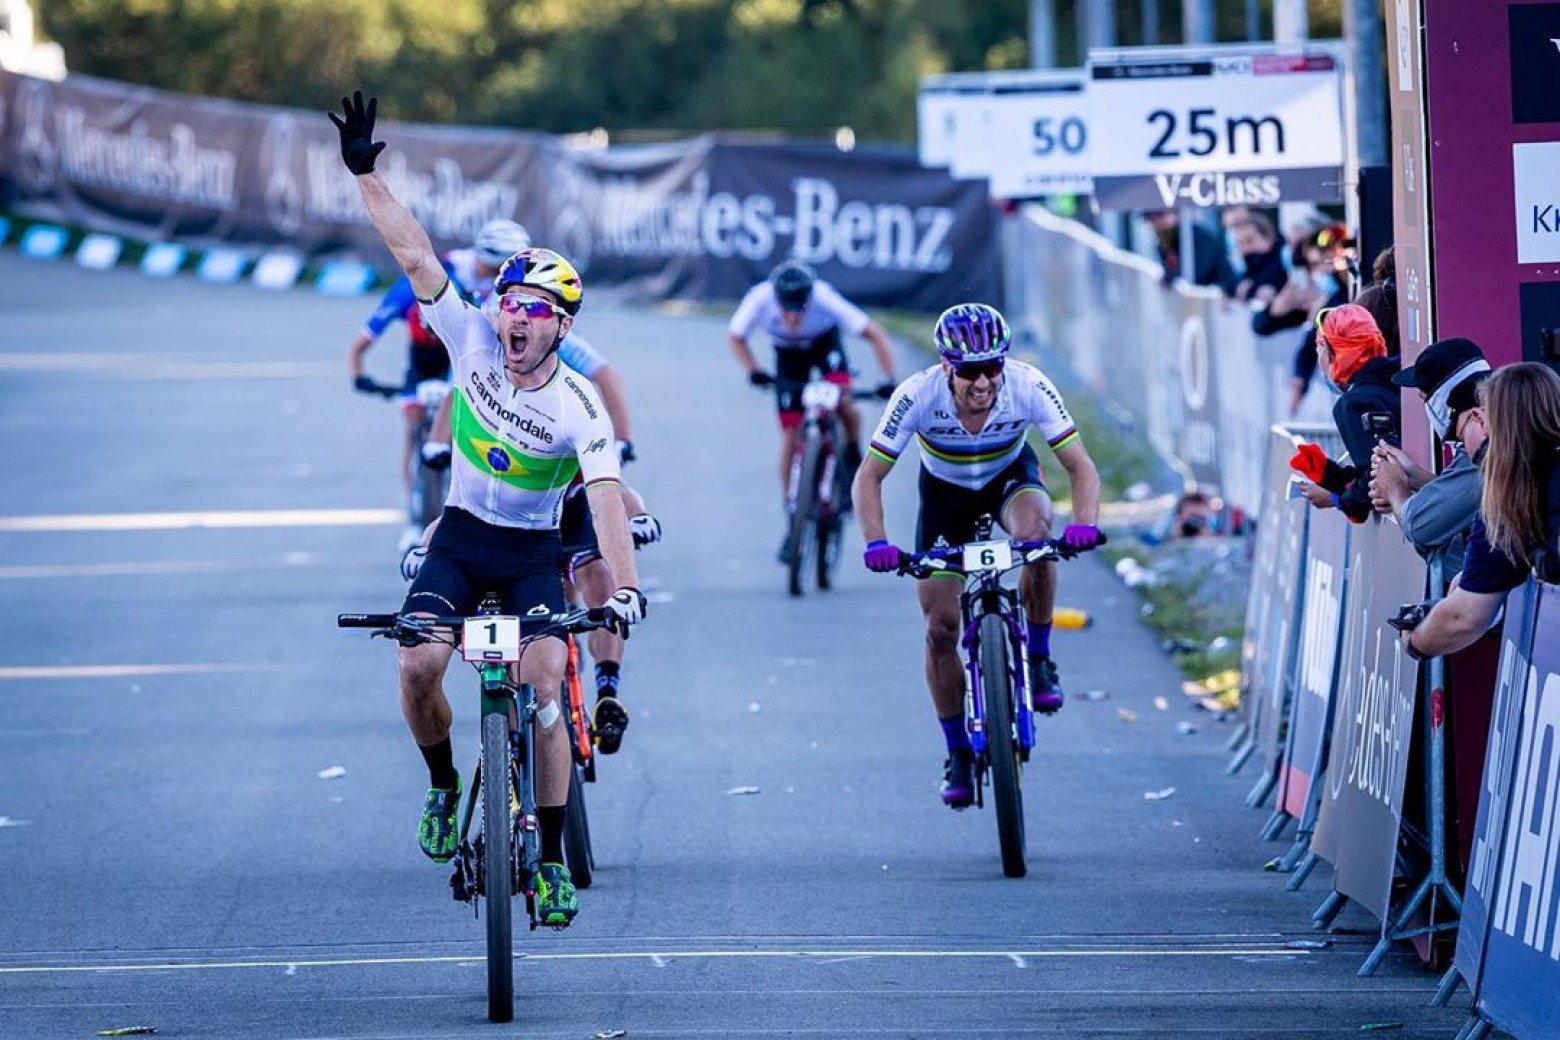 Mind Blowing Final Avancini Wins Second 2020 Nove Mesto Xco World Cup 